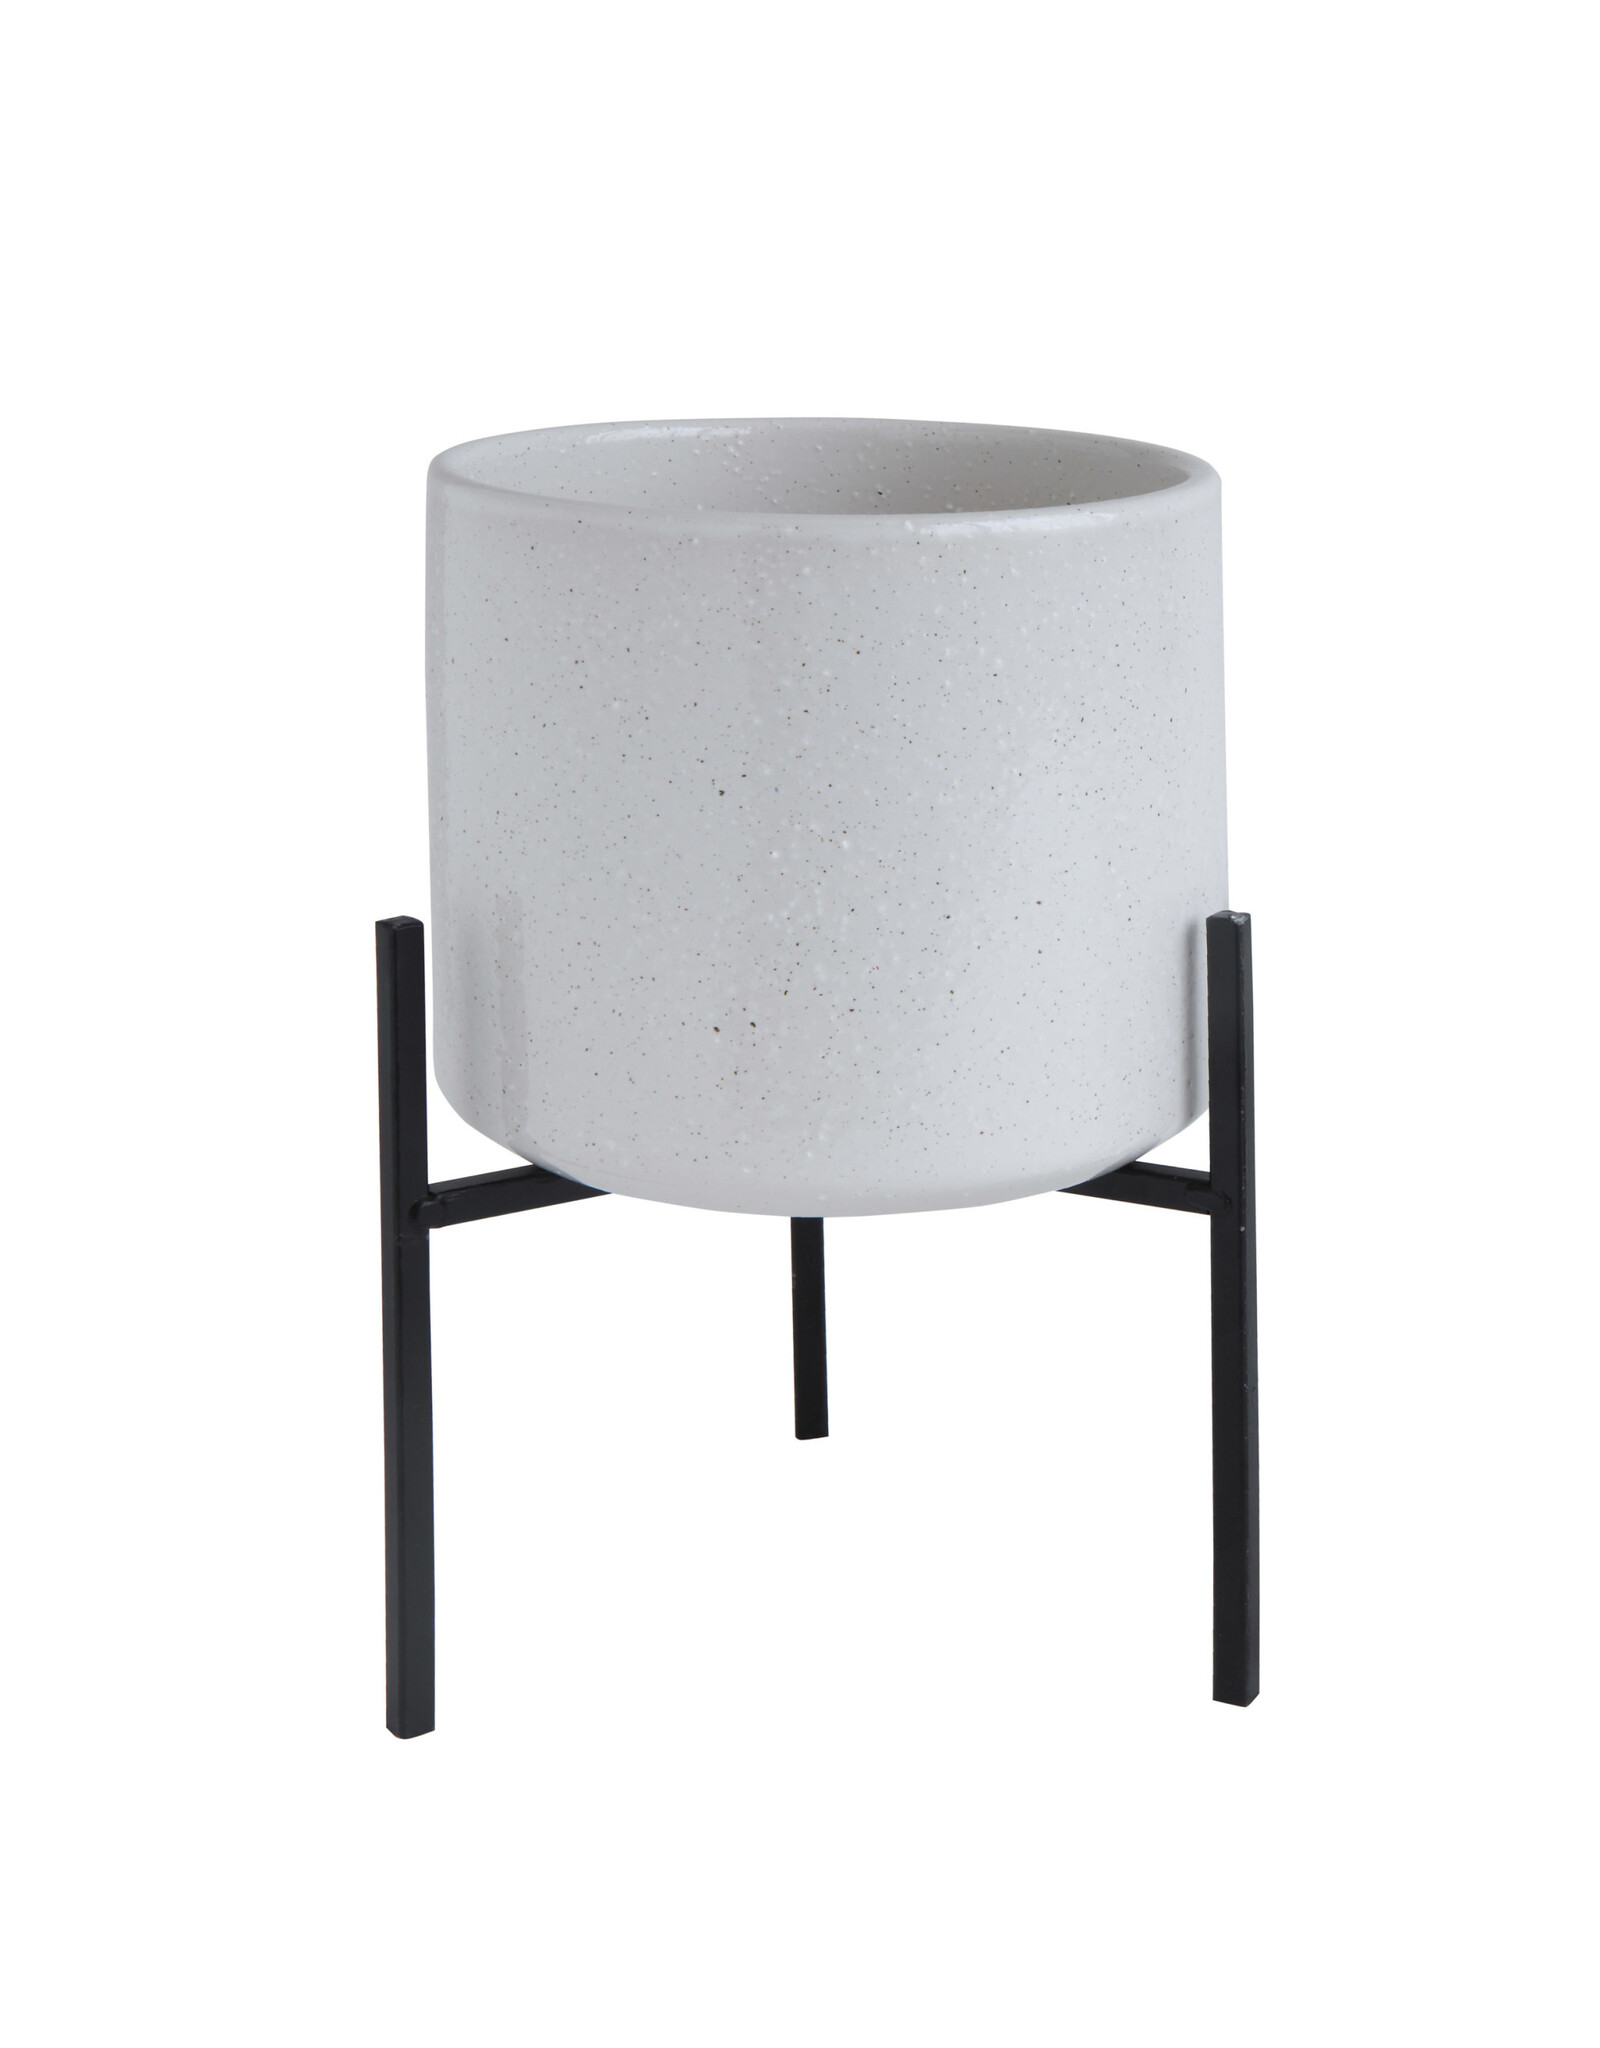 Planter with Metal Stand AH0058